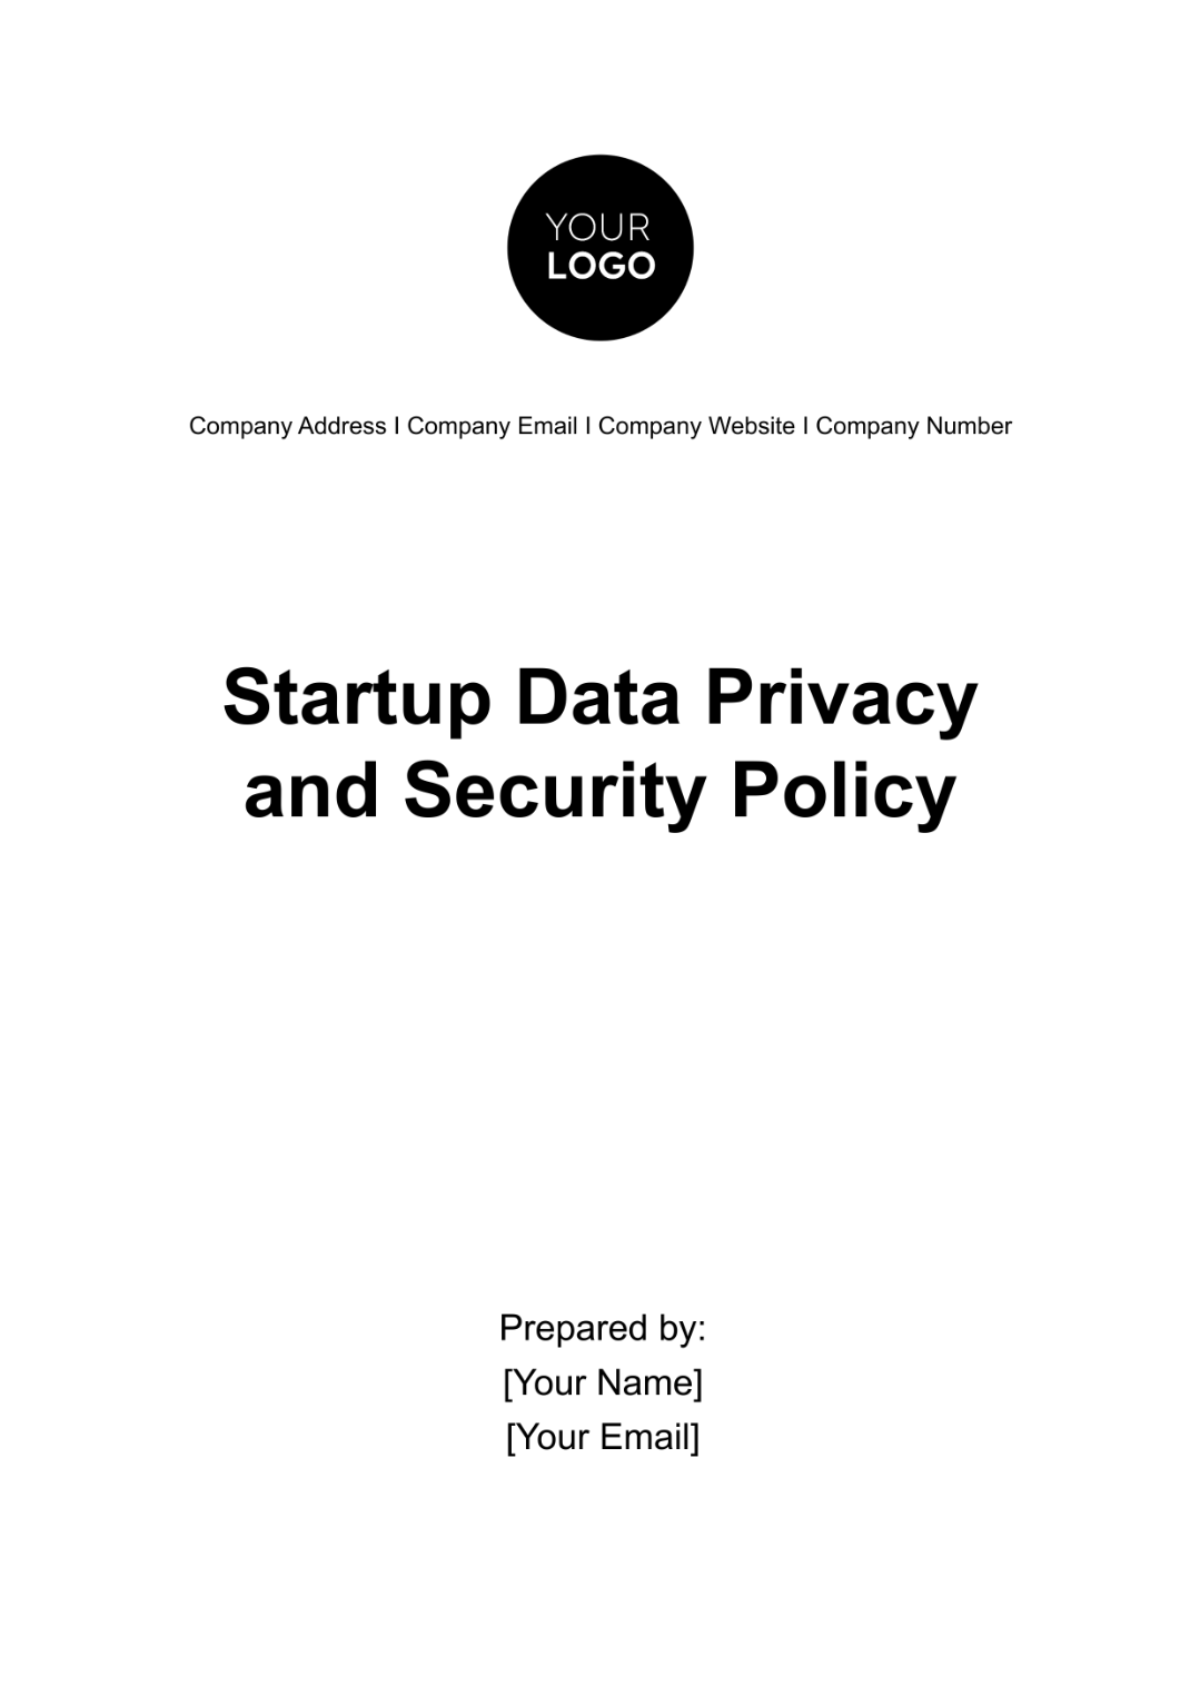 Startup Data Privacy and Security Policy Template